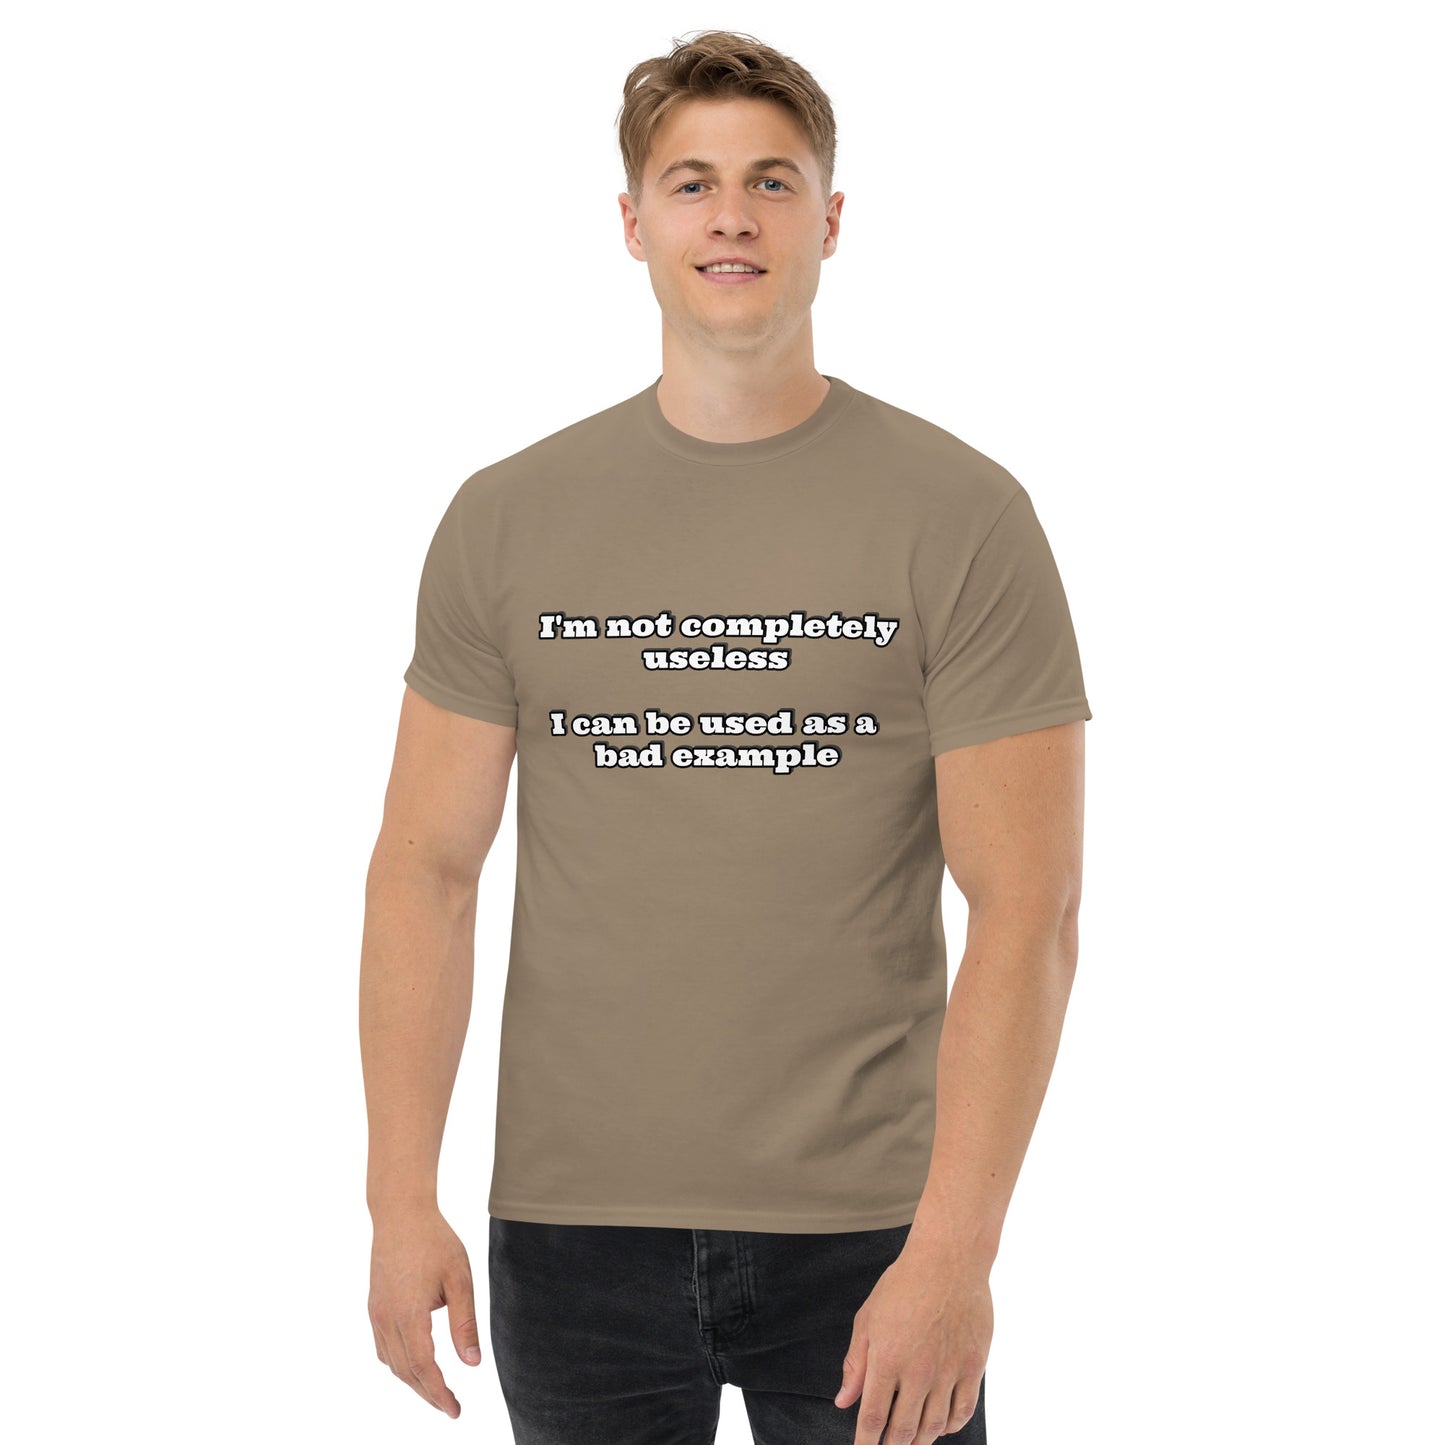 Men with savana brown t-shirt with text “I'm not completely useless I can be used as a bad example”